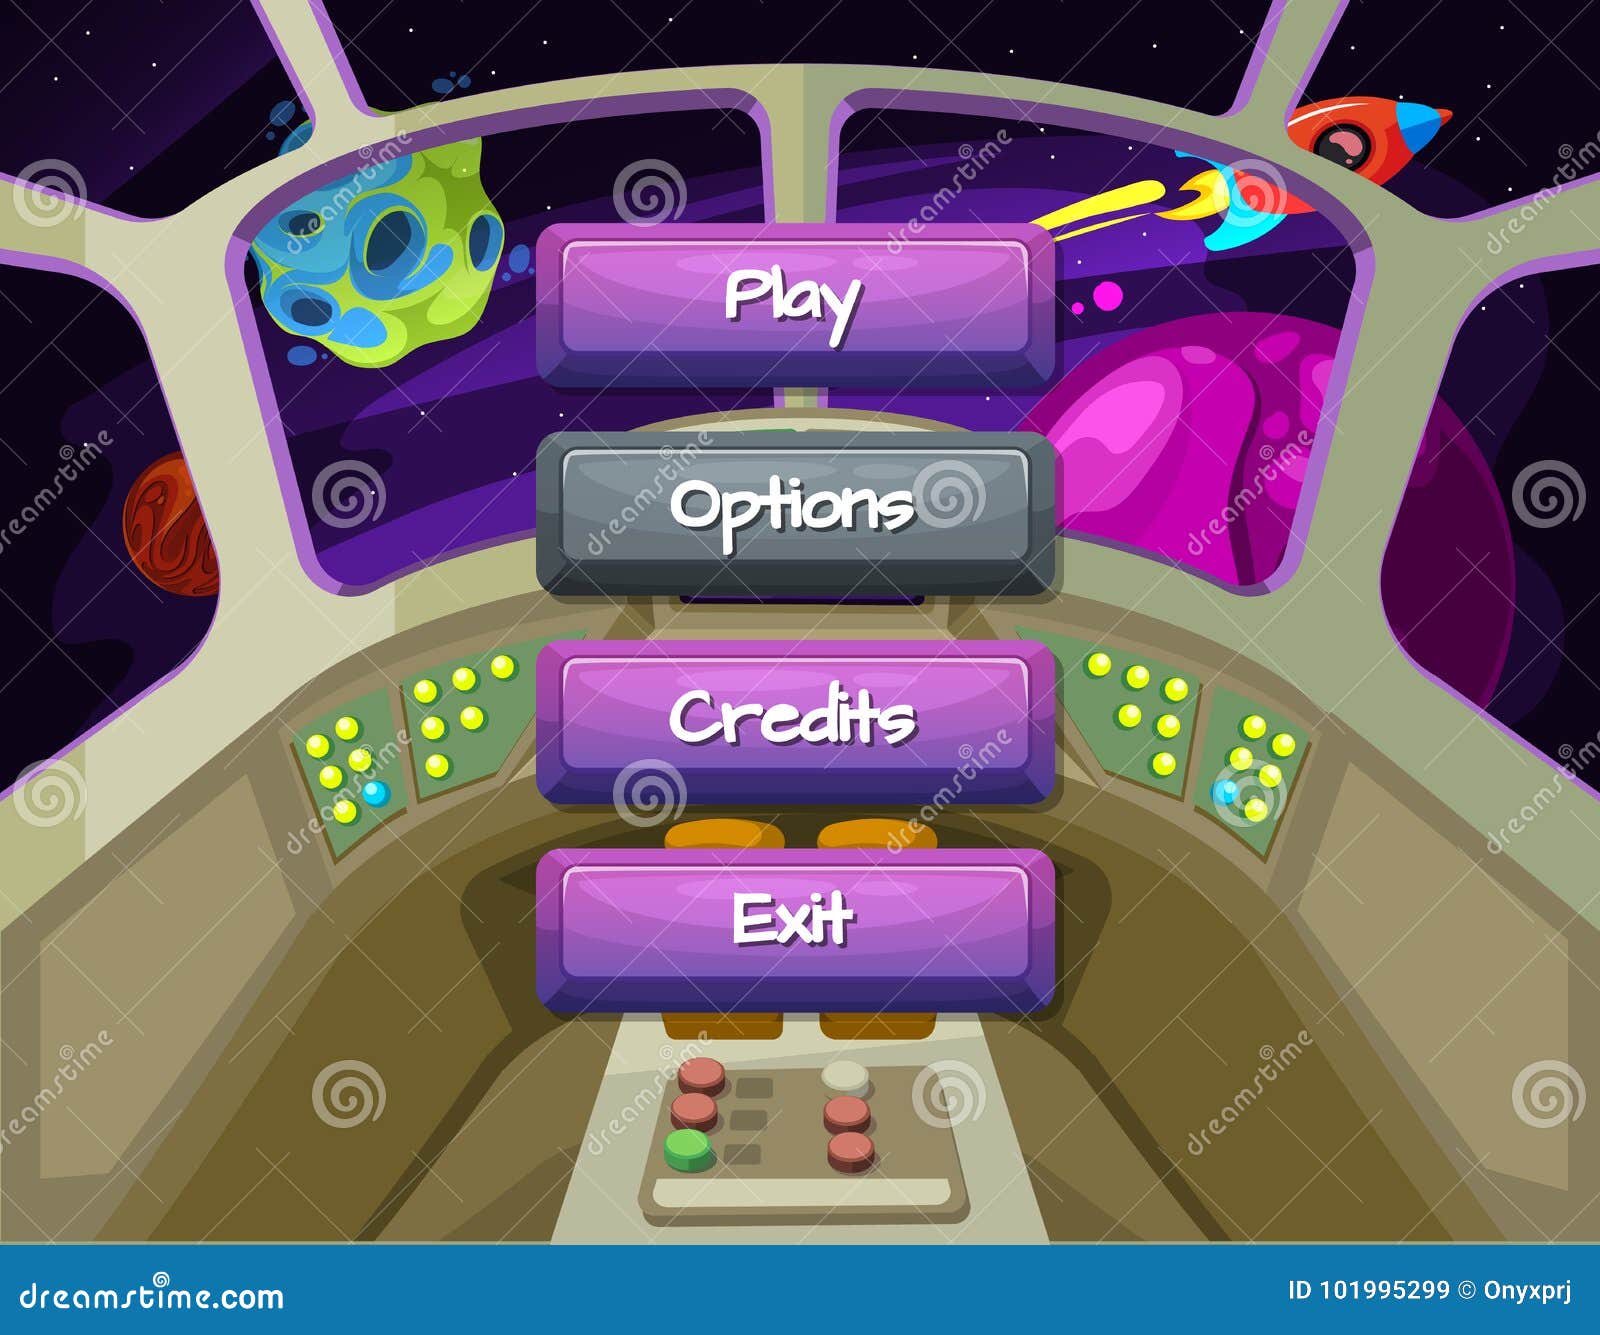  cartoon style enabled and disabled buttons with text for game  on spaceship texture background